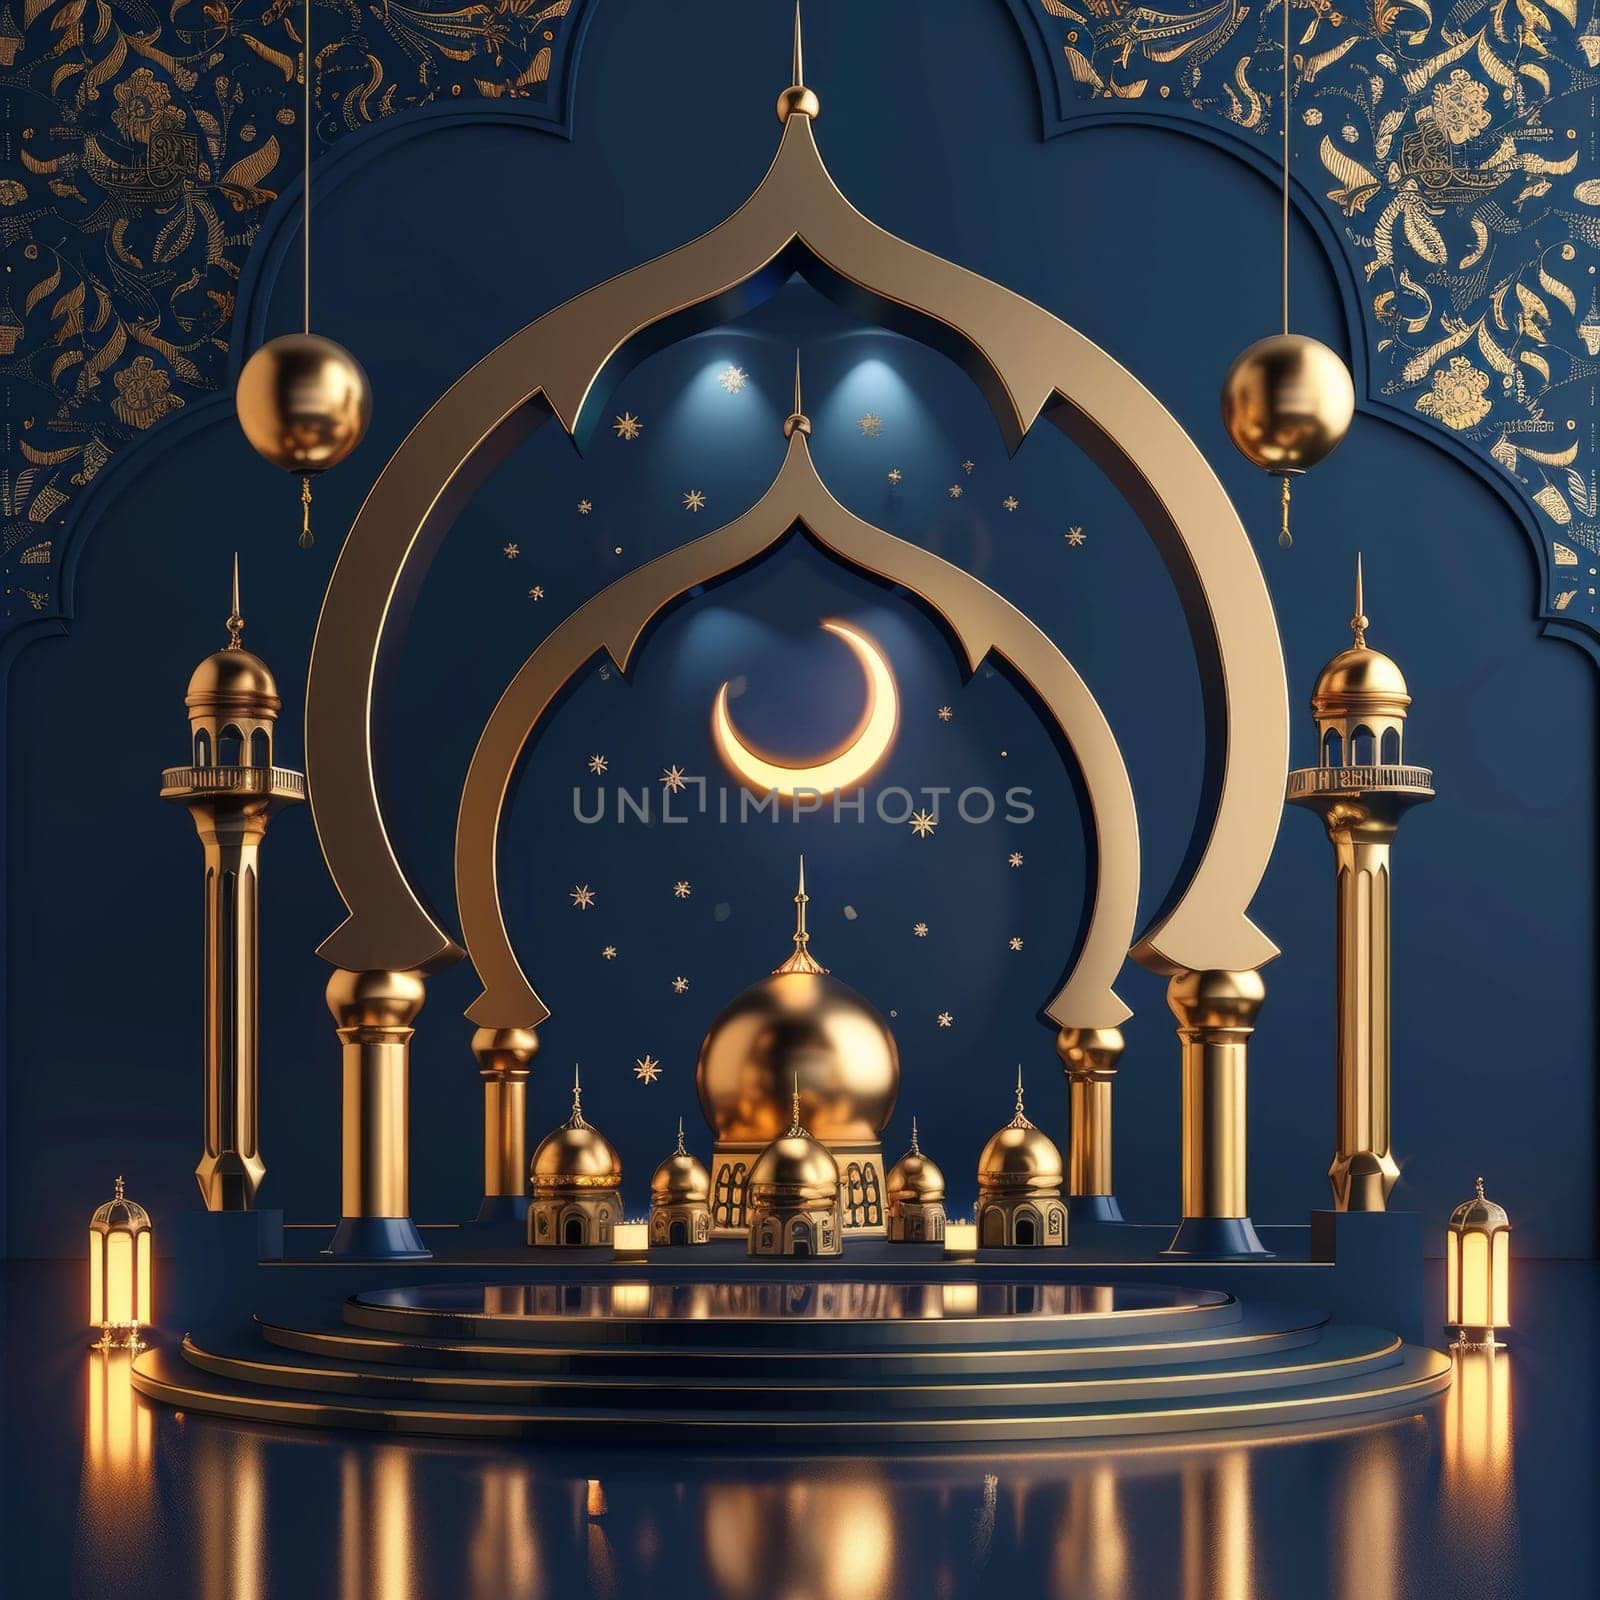 Artistic depiction of an ornate mosque with a golden arch framing a crescent moon and stars